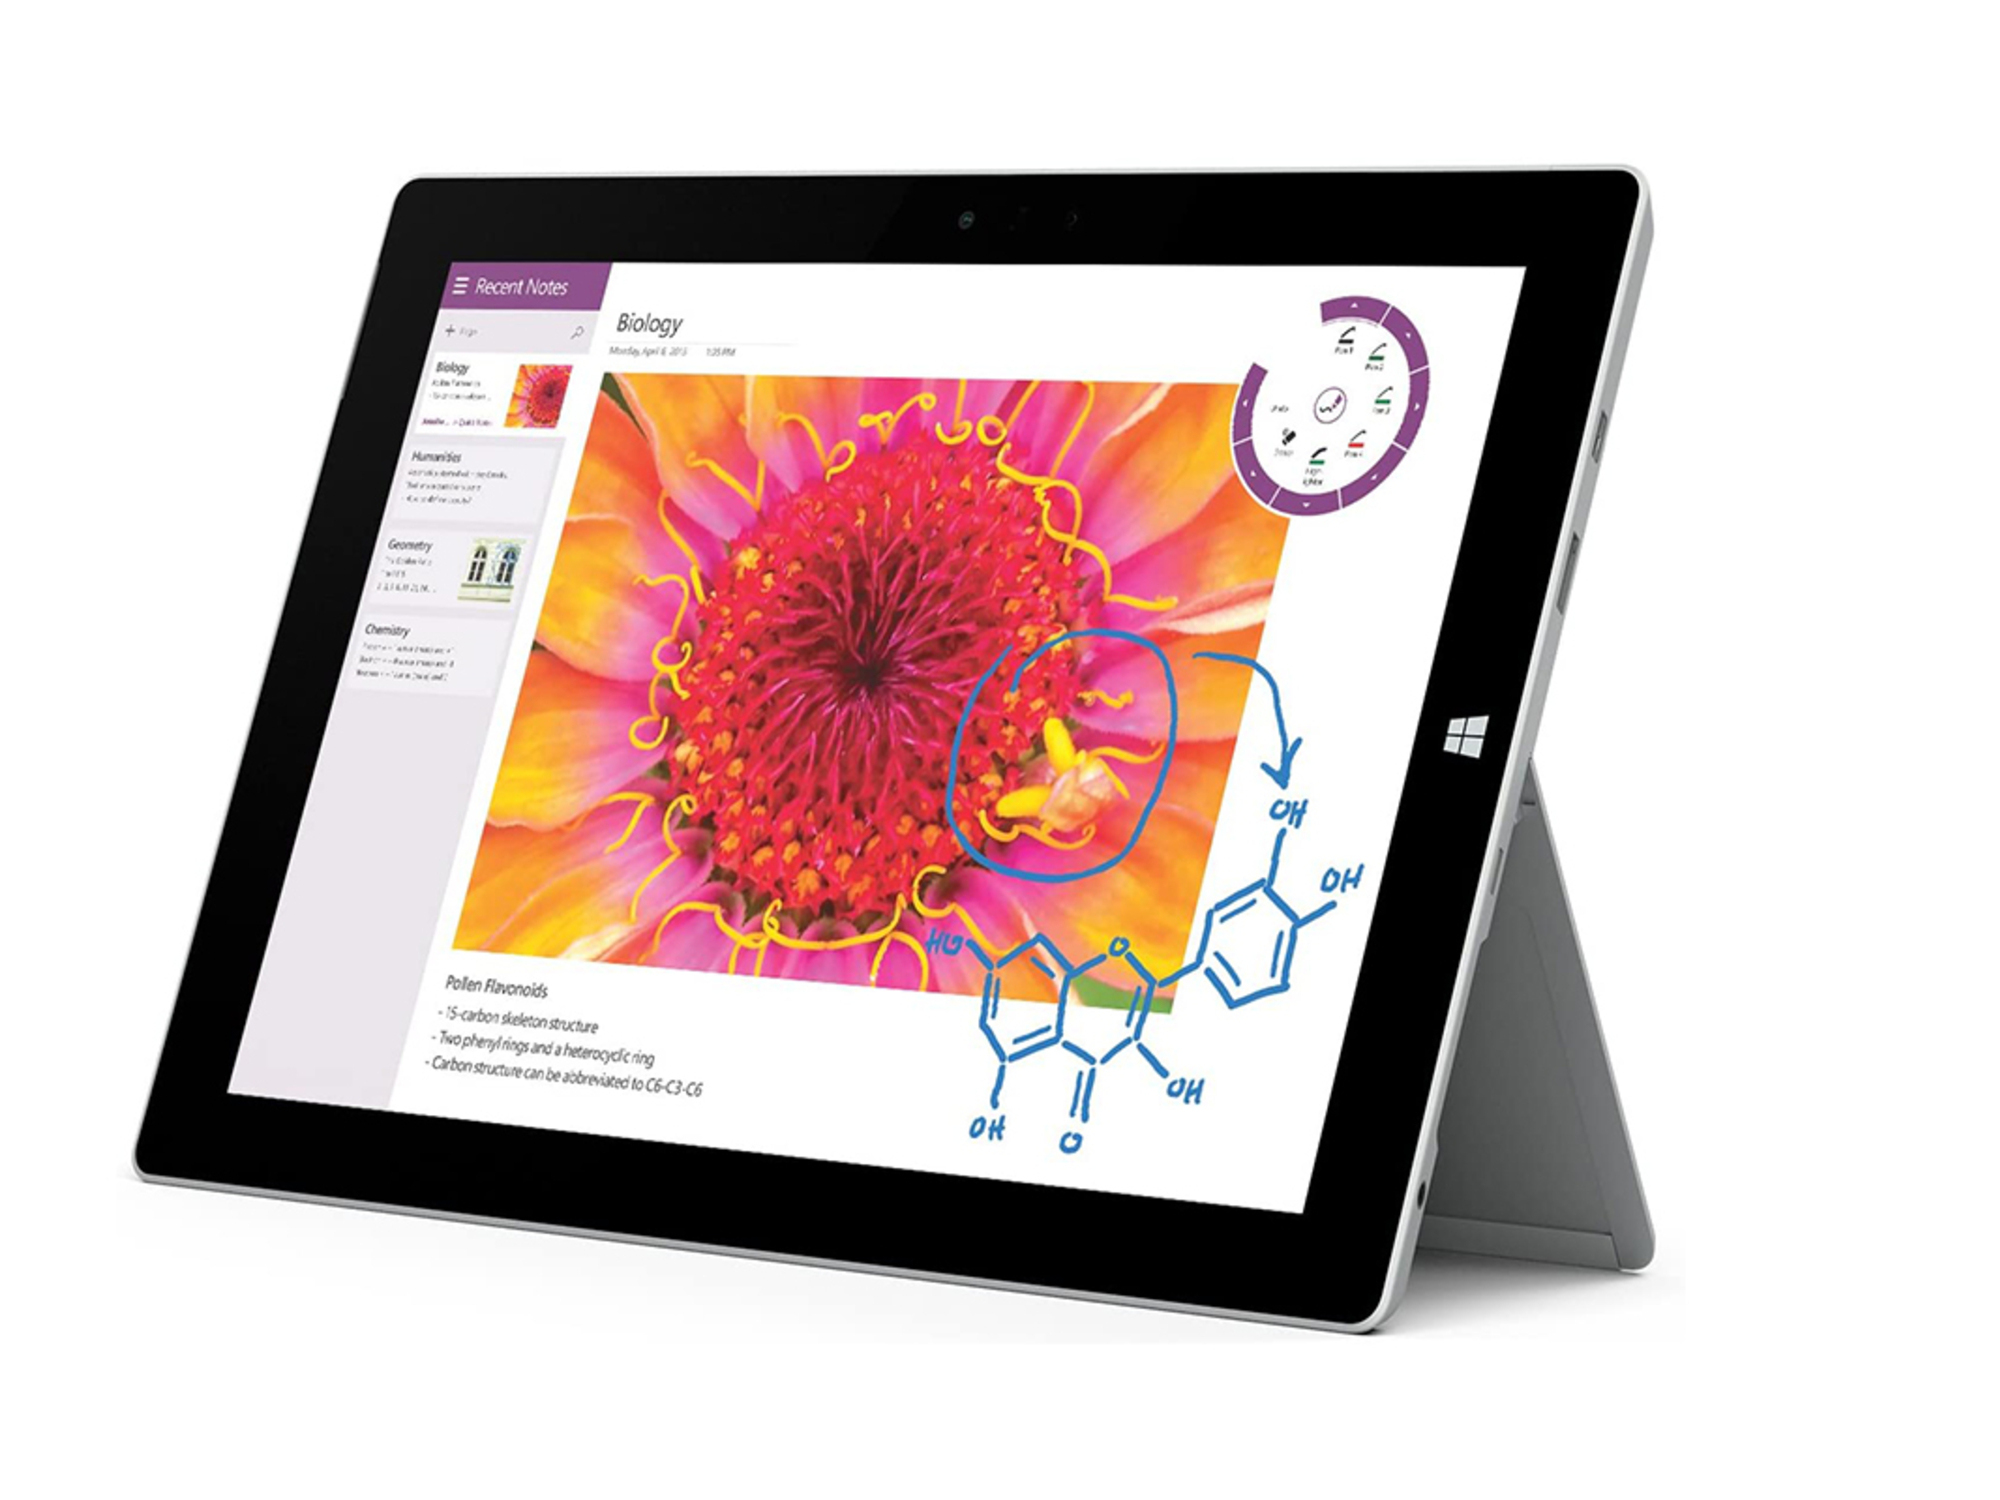 Now’s your last chance to take home this refurbished Microsoft Surface 3 for $199.99